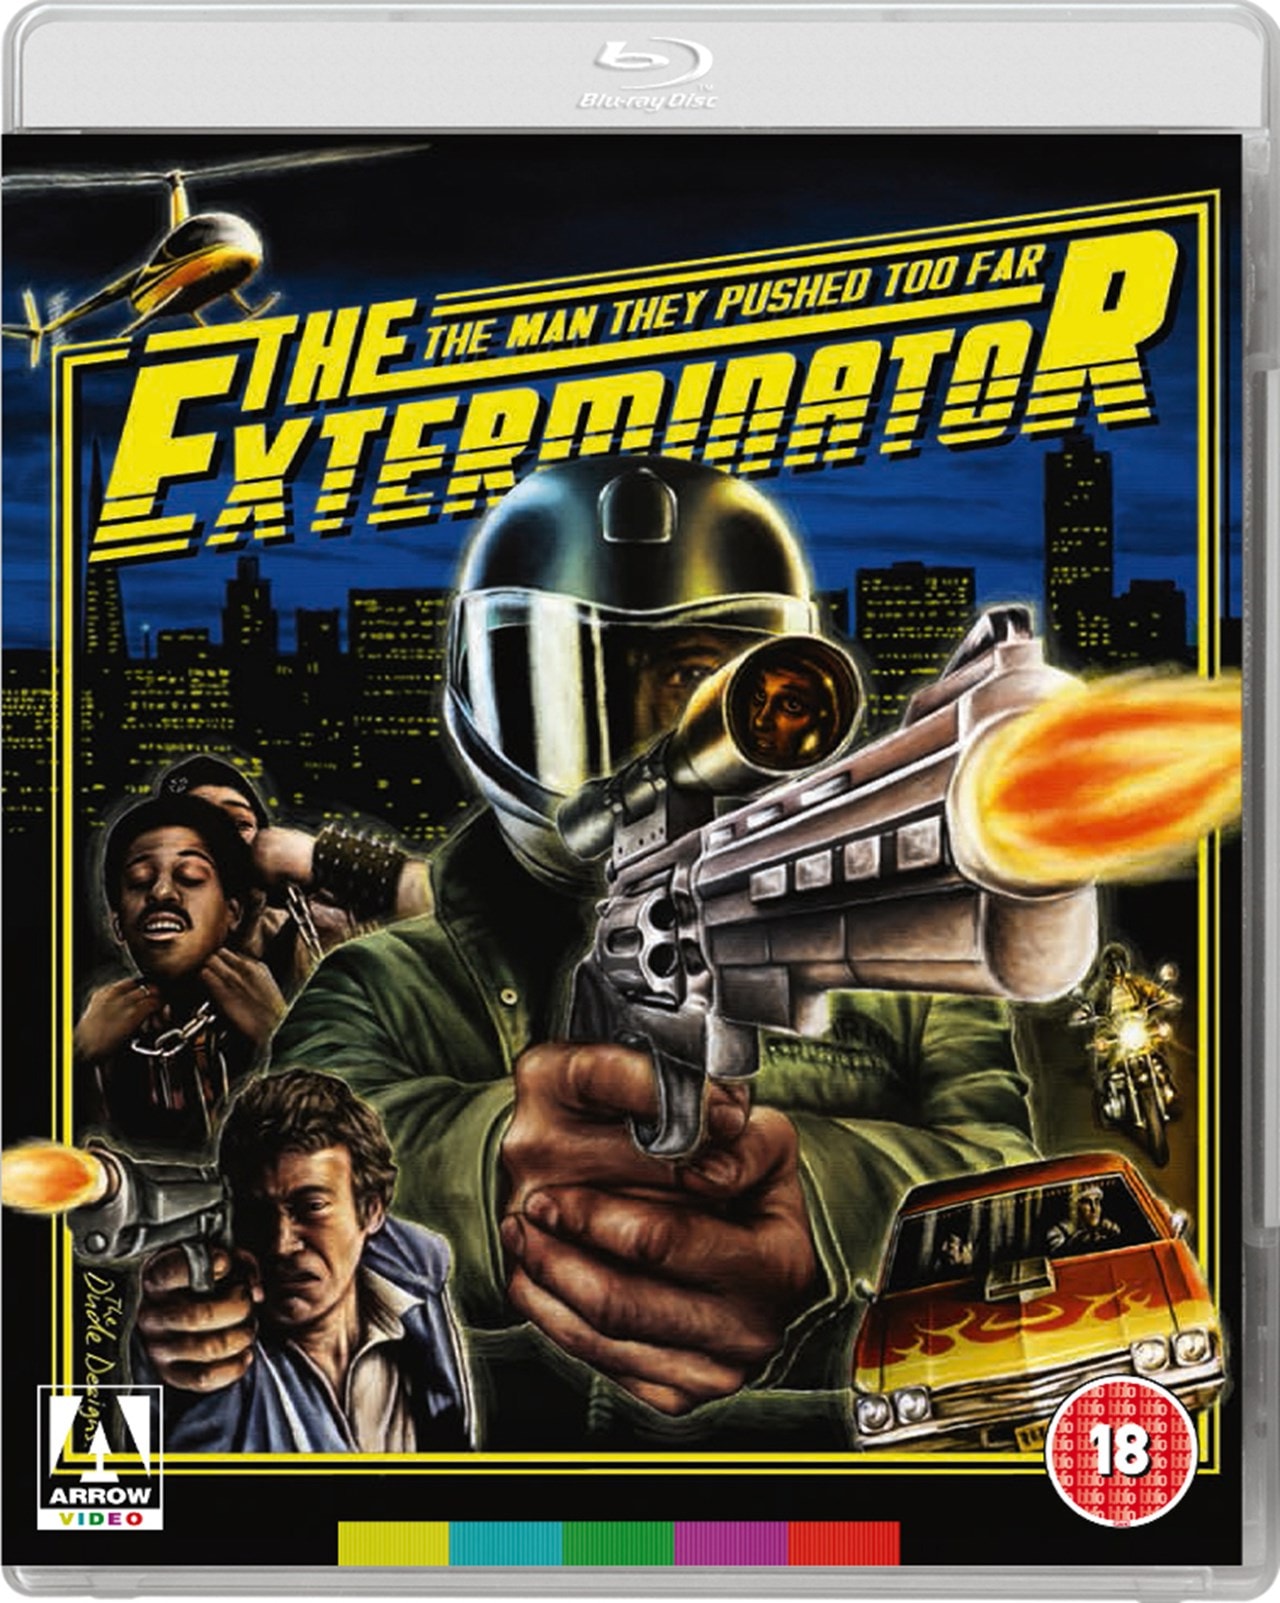 The Exterminator | Blu-ray | Free shipping over £20 | HMV Store